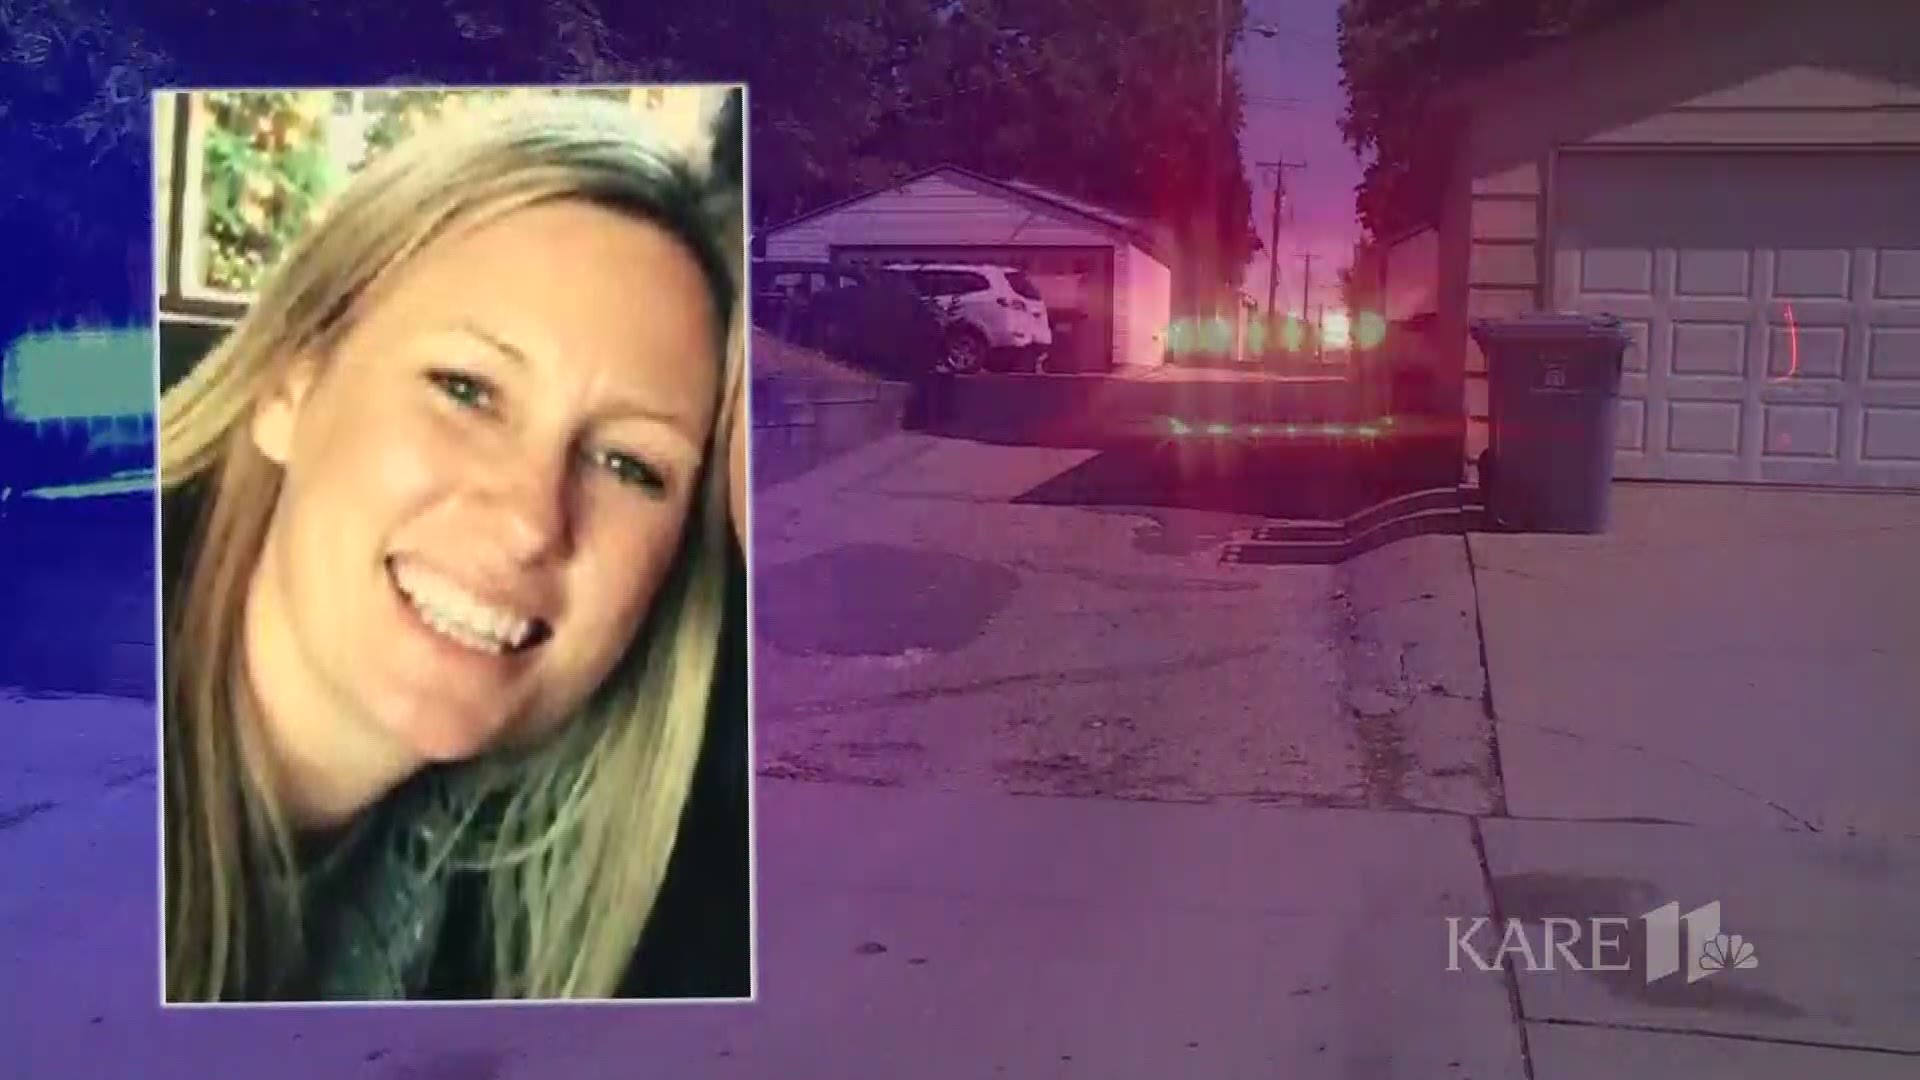 A timeline of events related to the officer-involved shooting death of Justine Ruszczyk Damond. https://kare11.tv/2GLg4RD